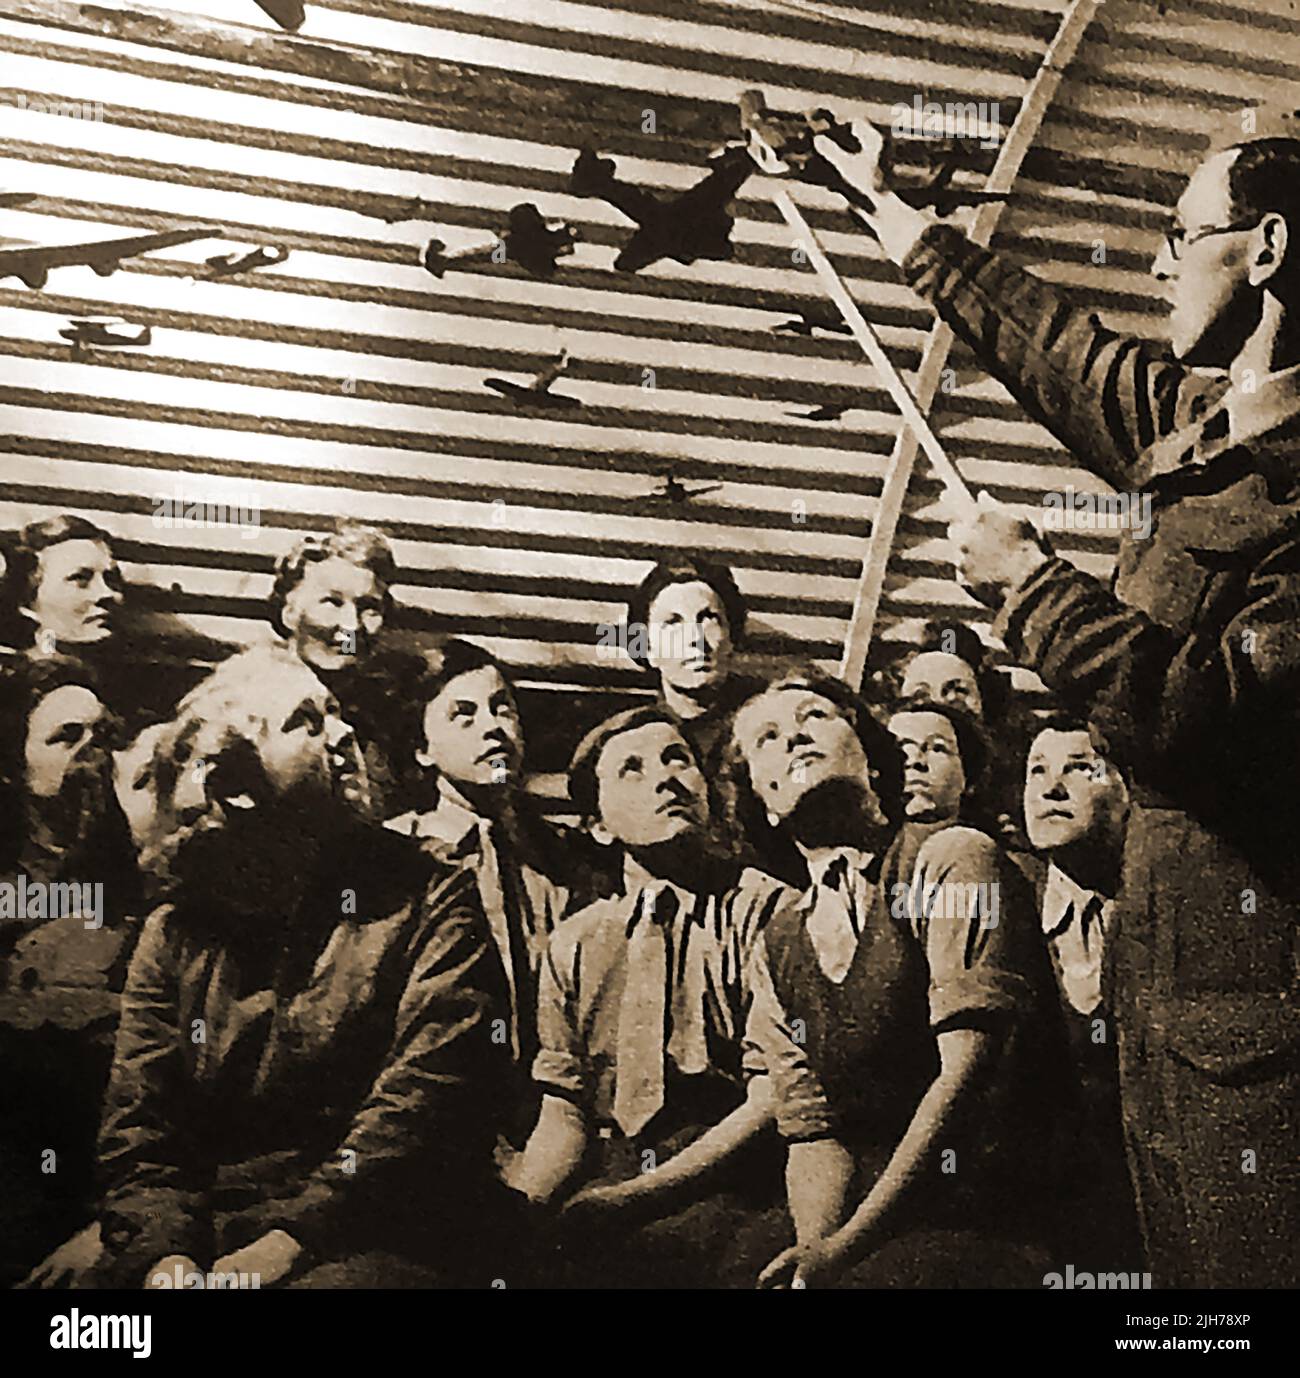 World war 2 , anti-aircraft precautions -- WWII - ATS girls learning aircraft recognition. Stock Photo